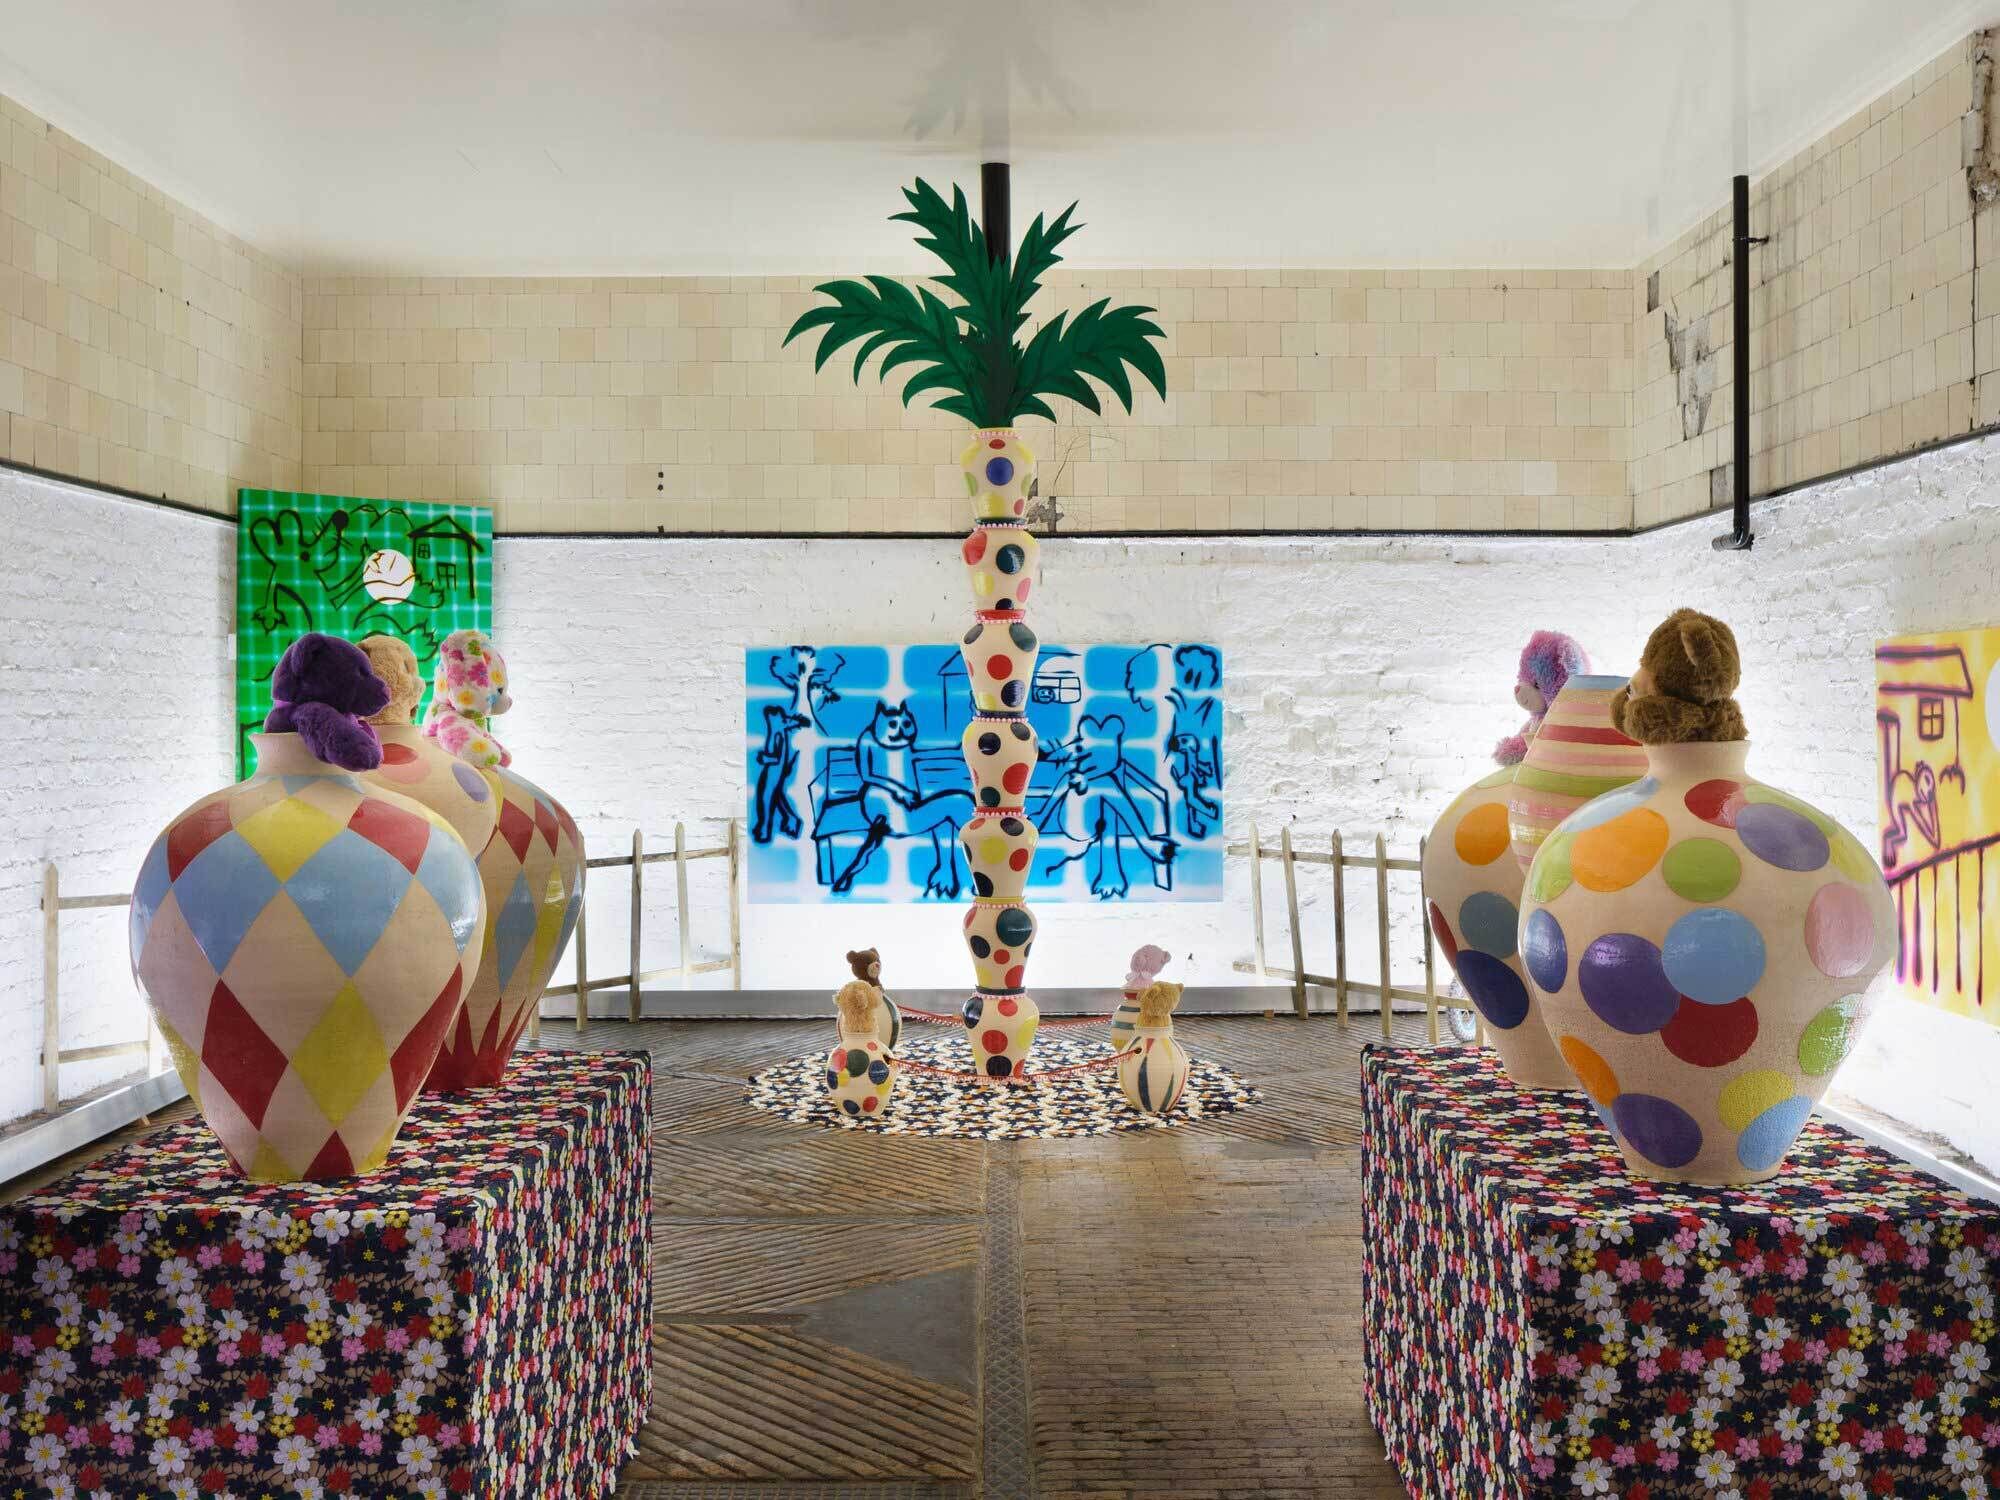 A room with colorful polka dot pots with stuffed animals peeking out, leading to a colorful palm tree stacked of pots.